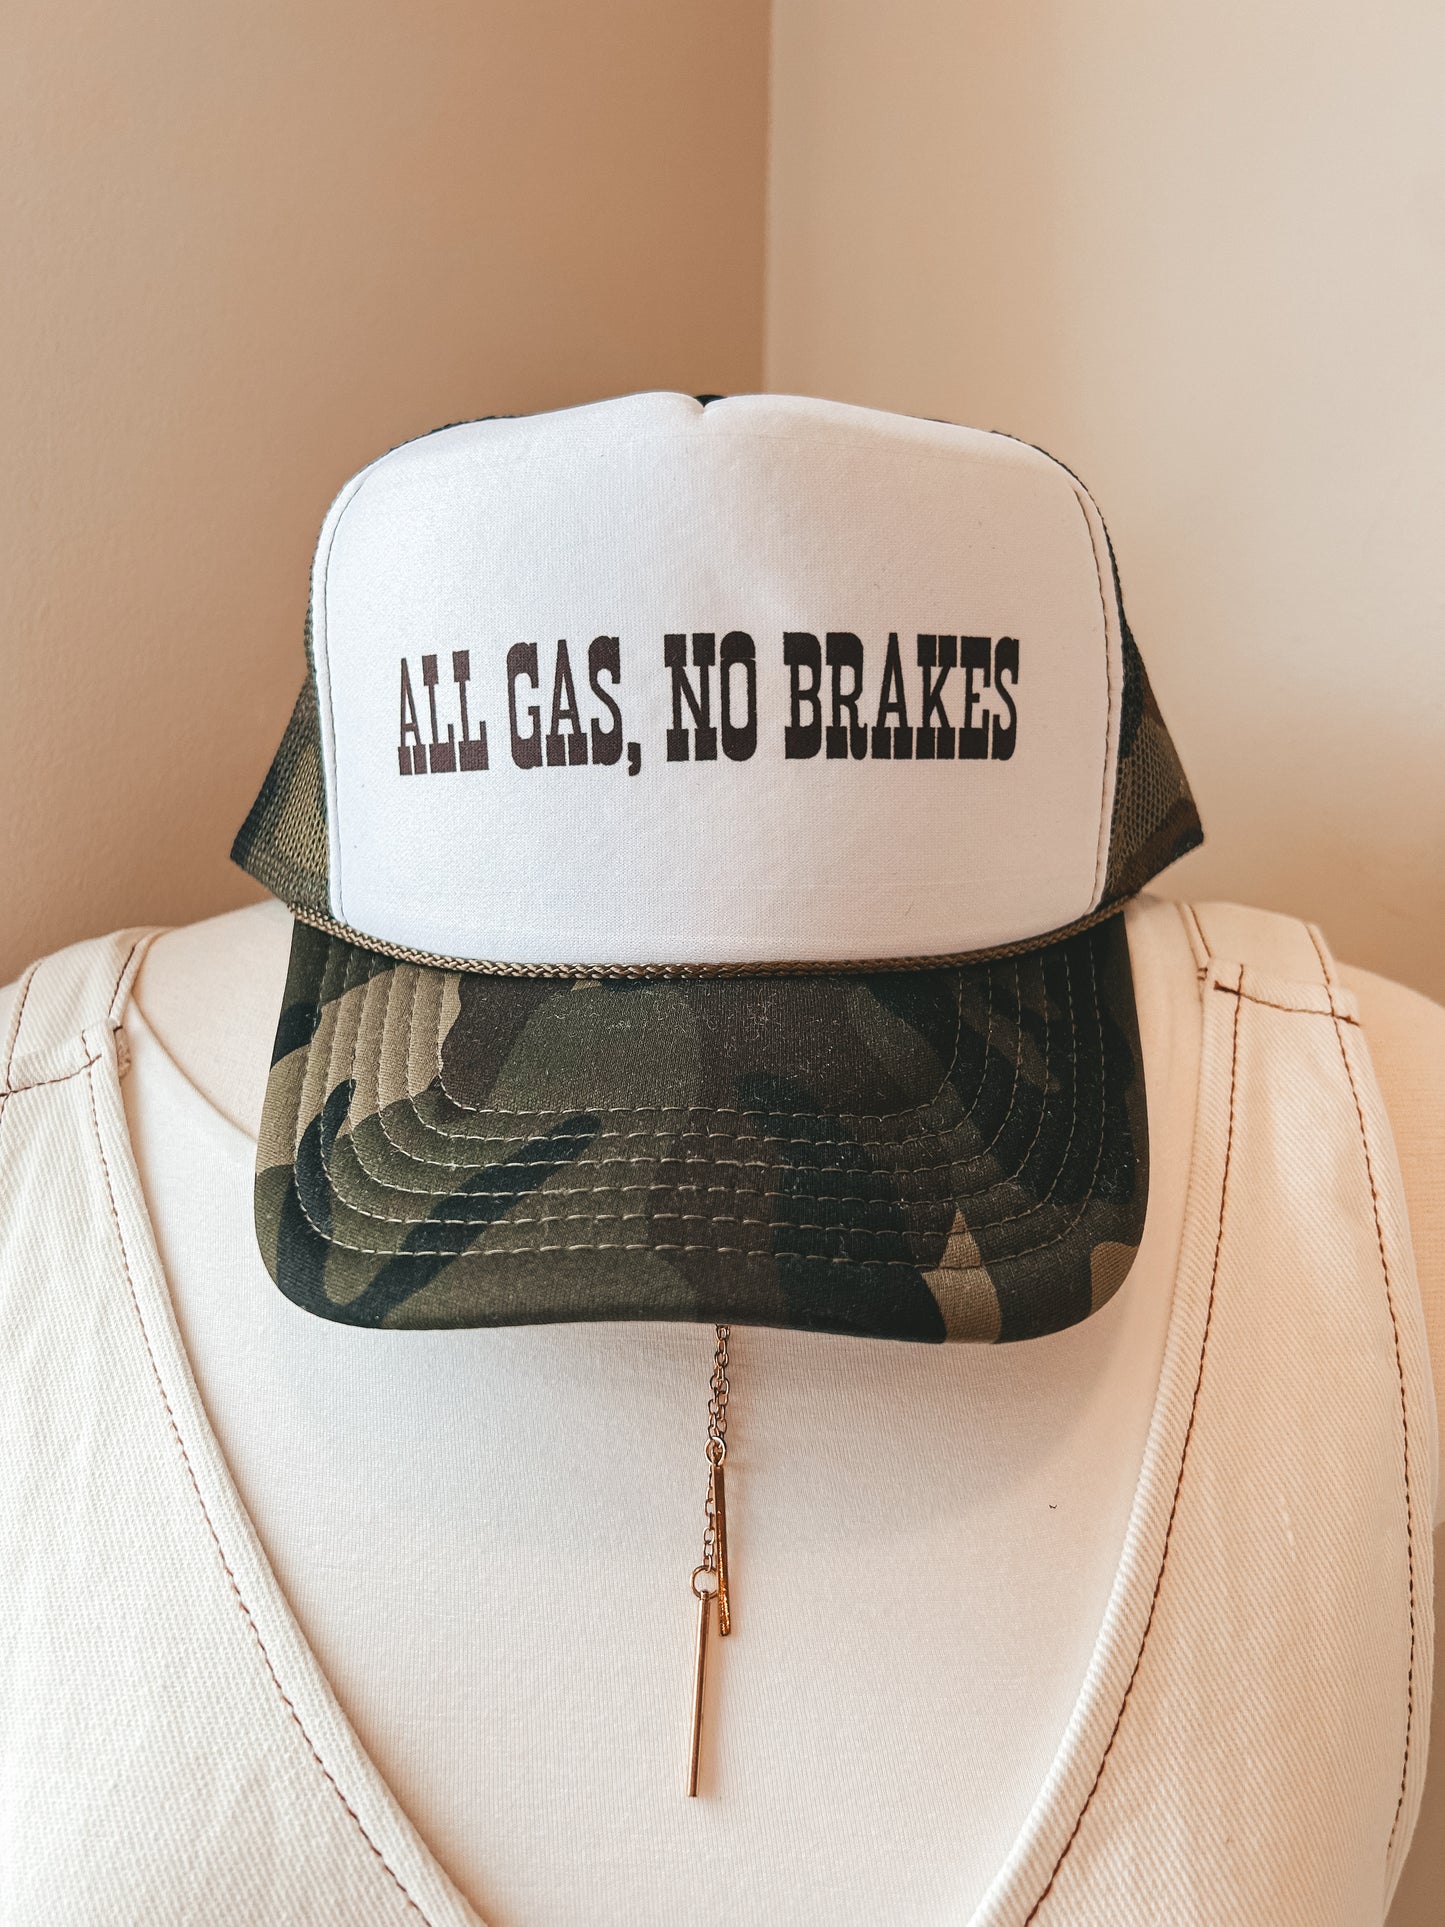 ALL GAS NO BRAKES HAT